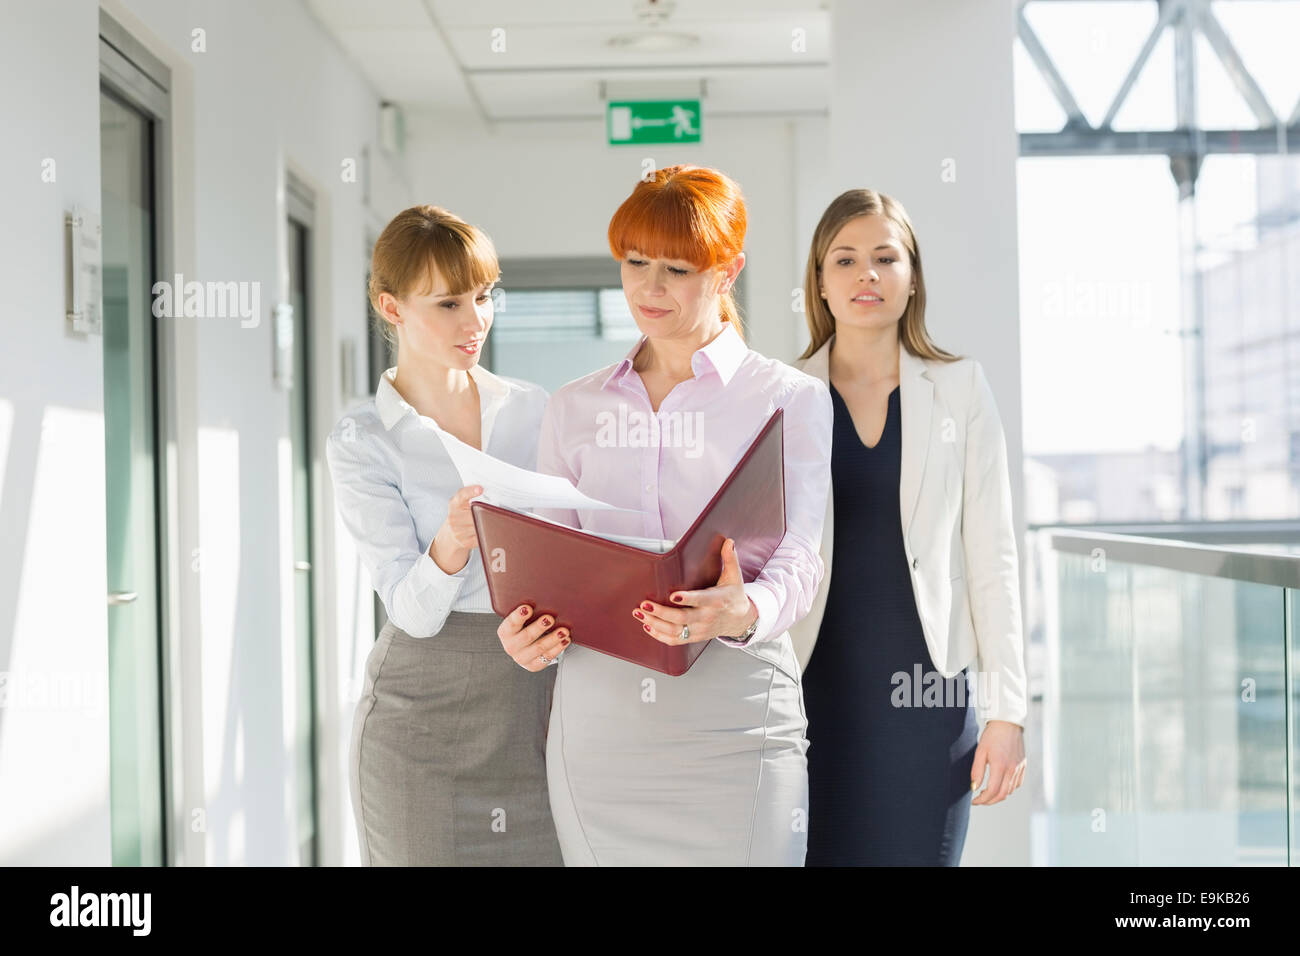 Businesswomen discussing over documents at office hallway Stock Photo